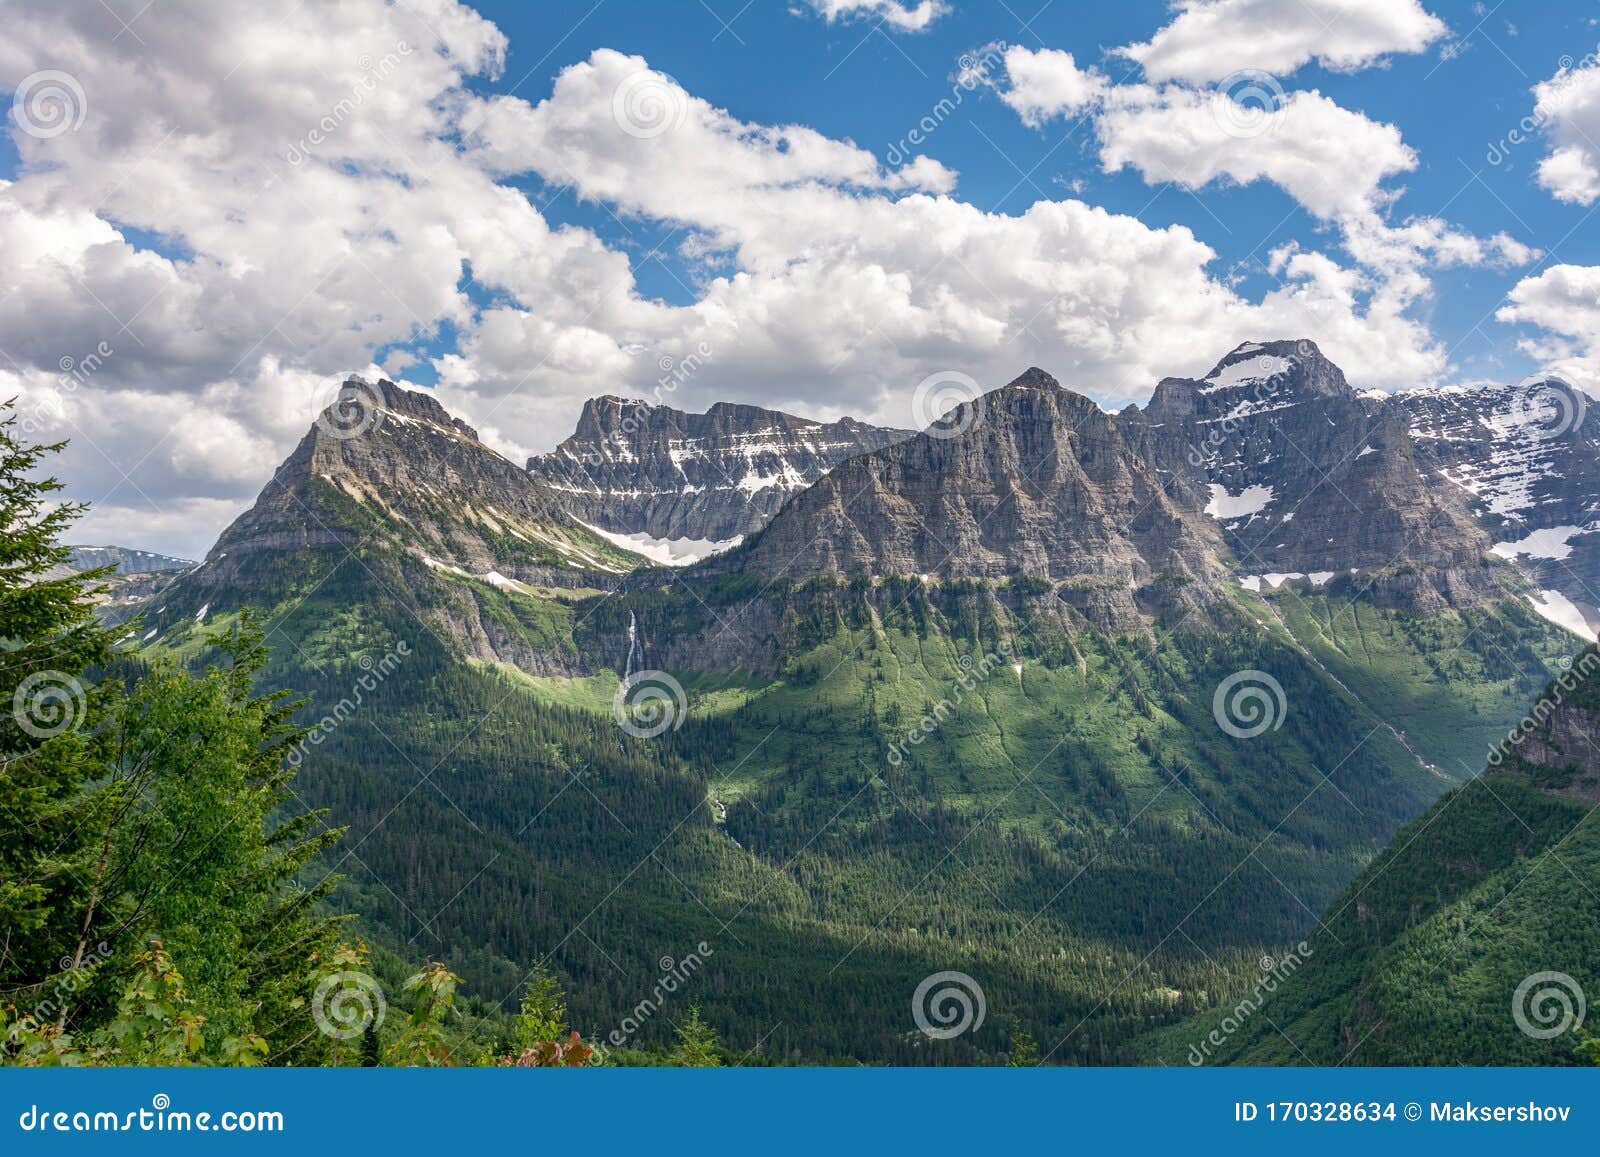 mount cannon is located in the lewis range, glacier national park in the u.s. state of montana